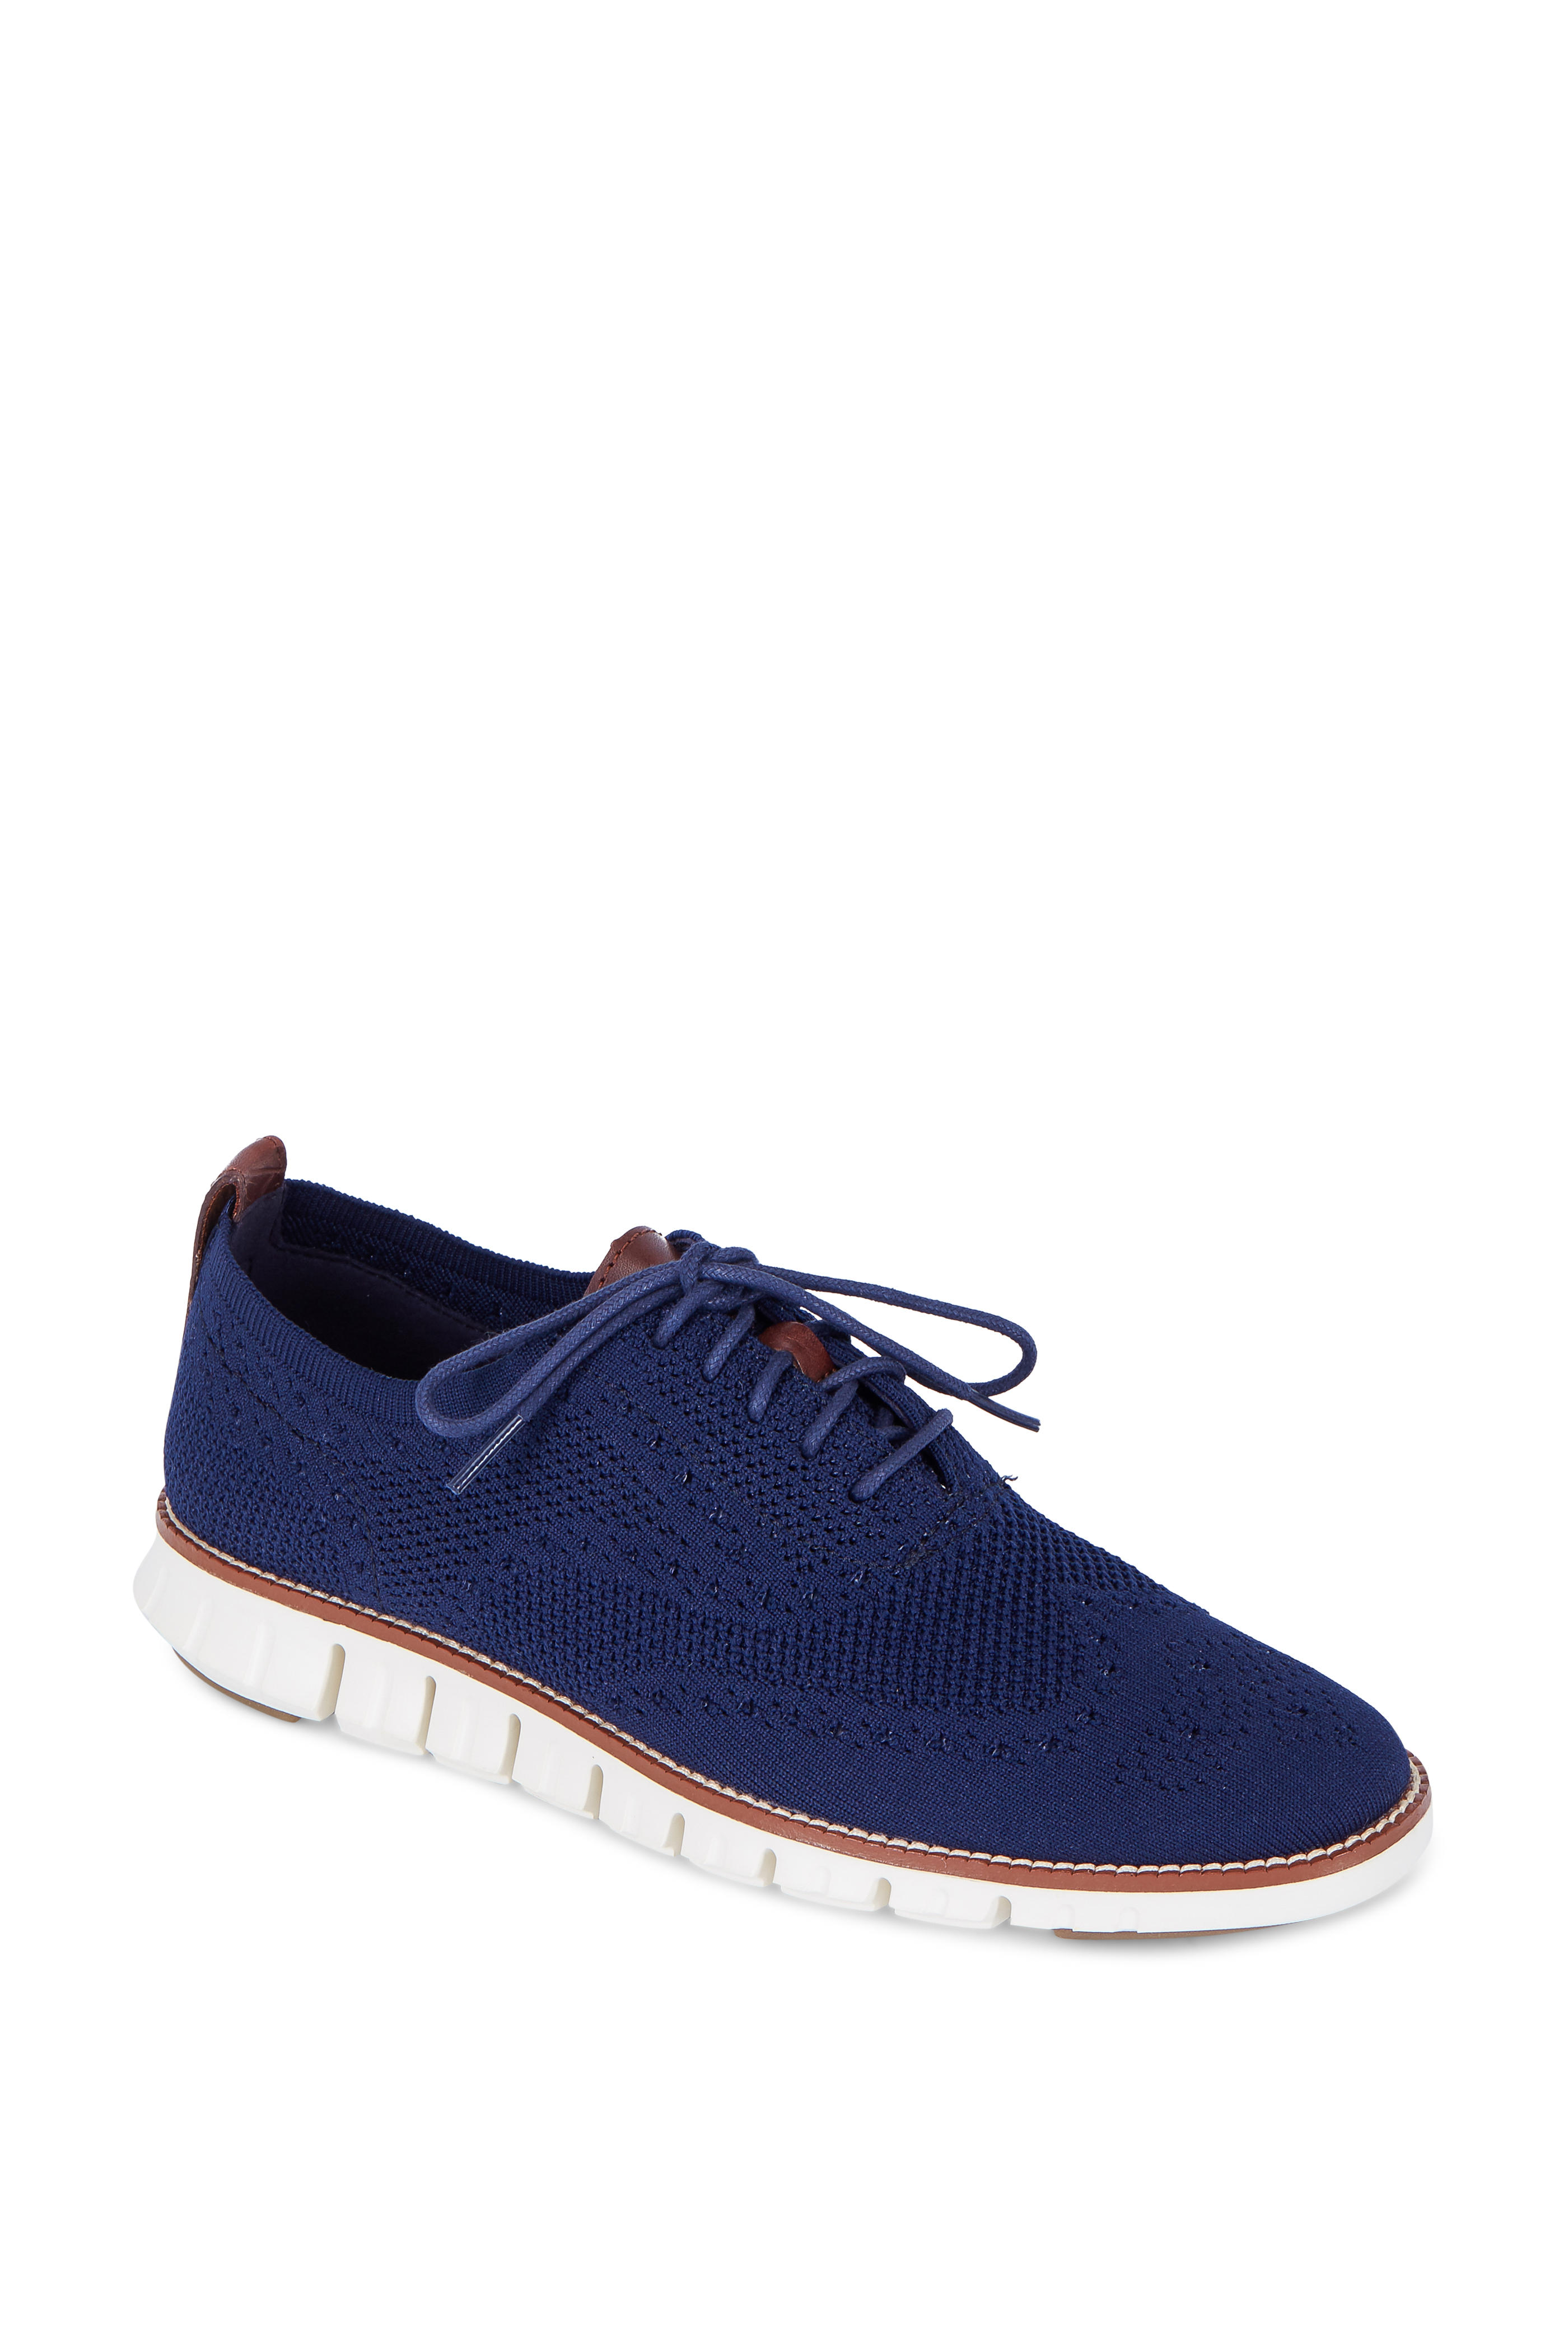 cole haan knit oxford